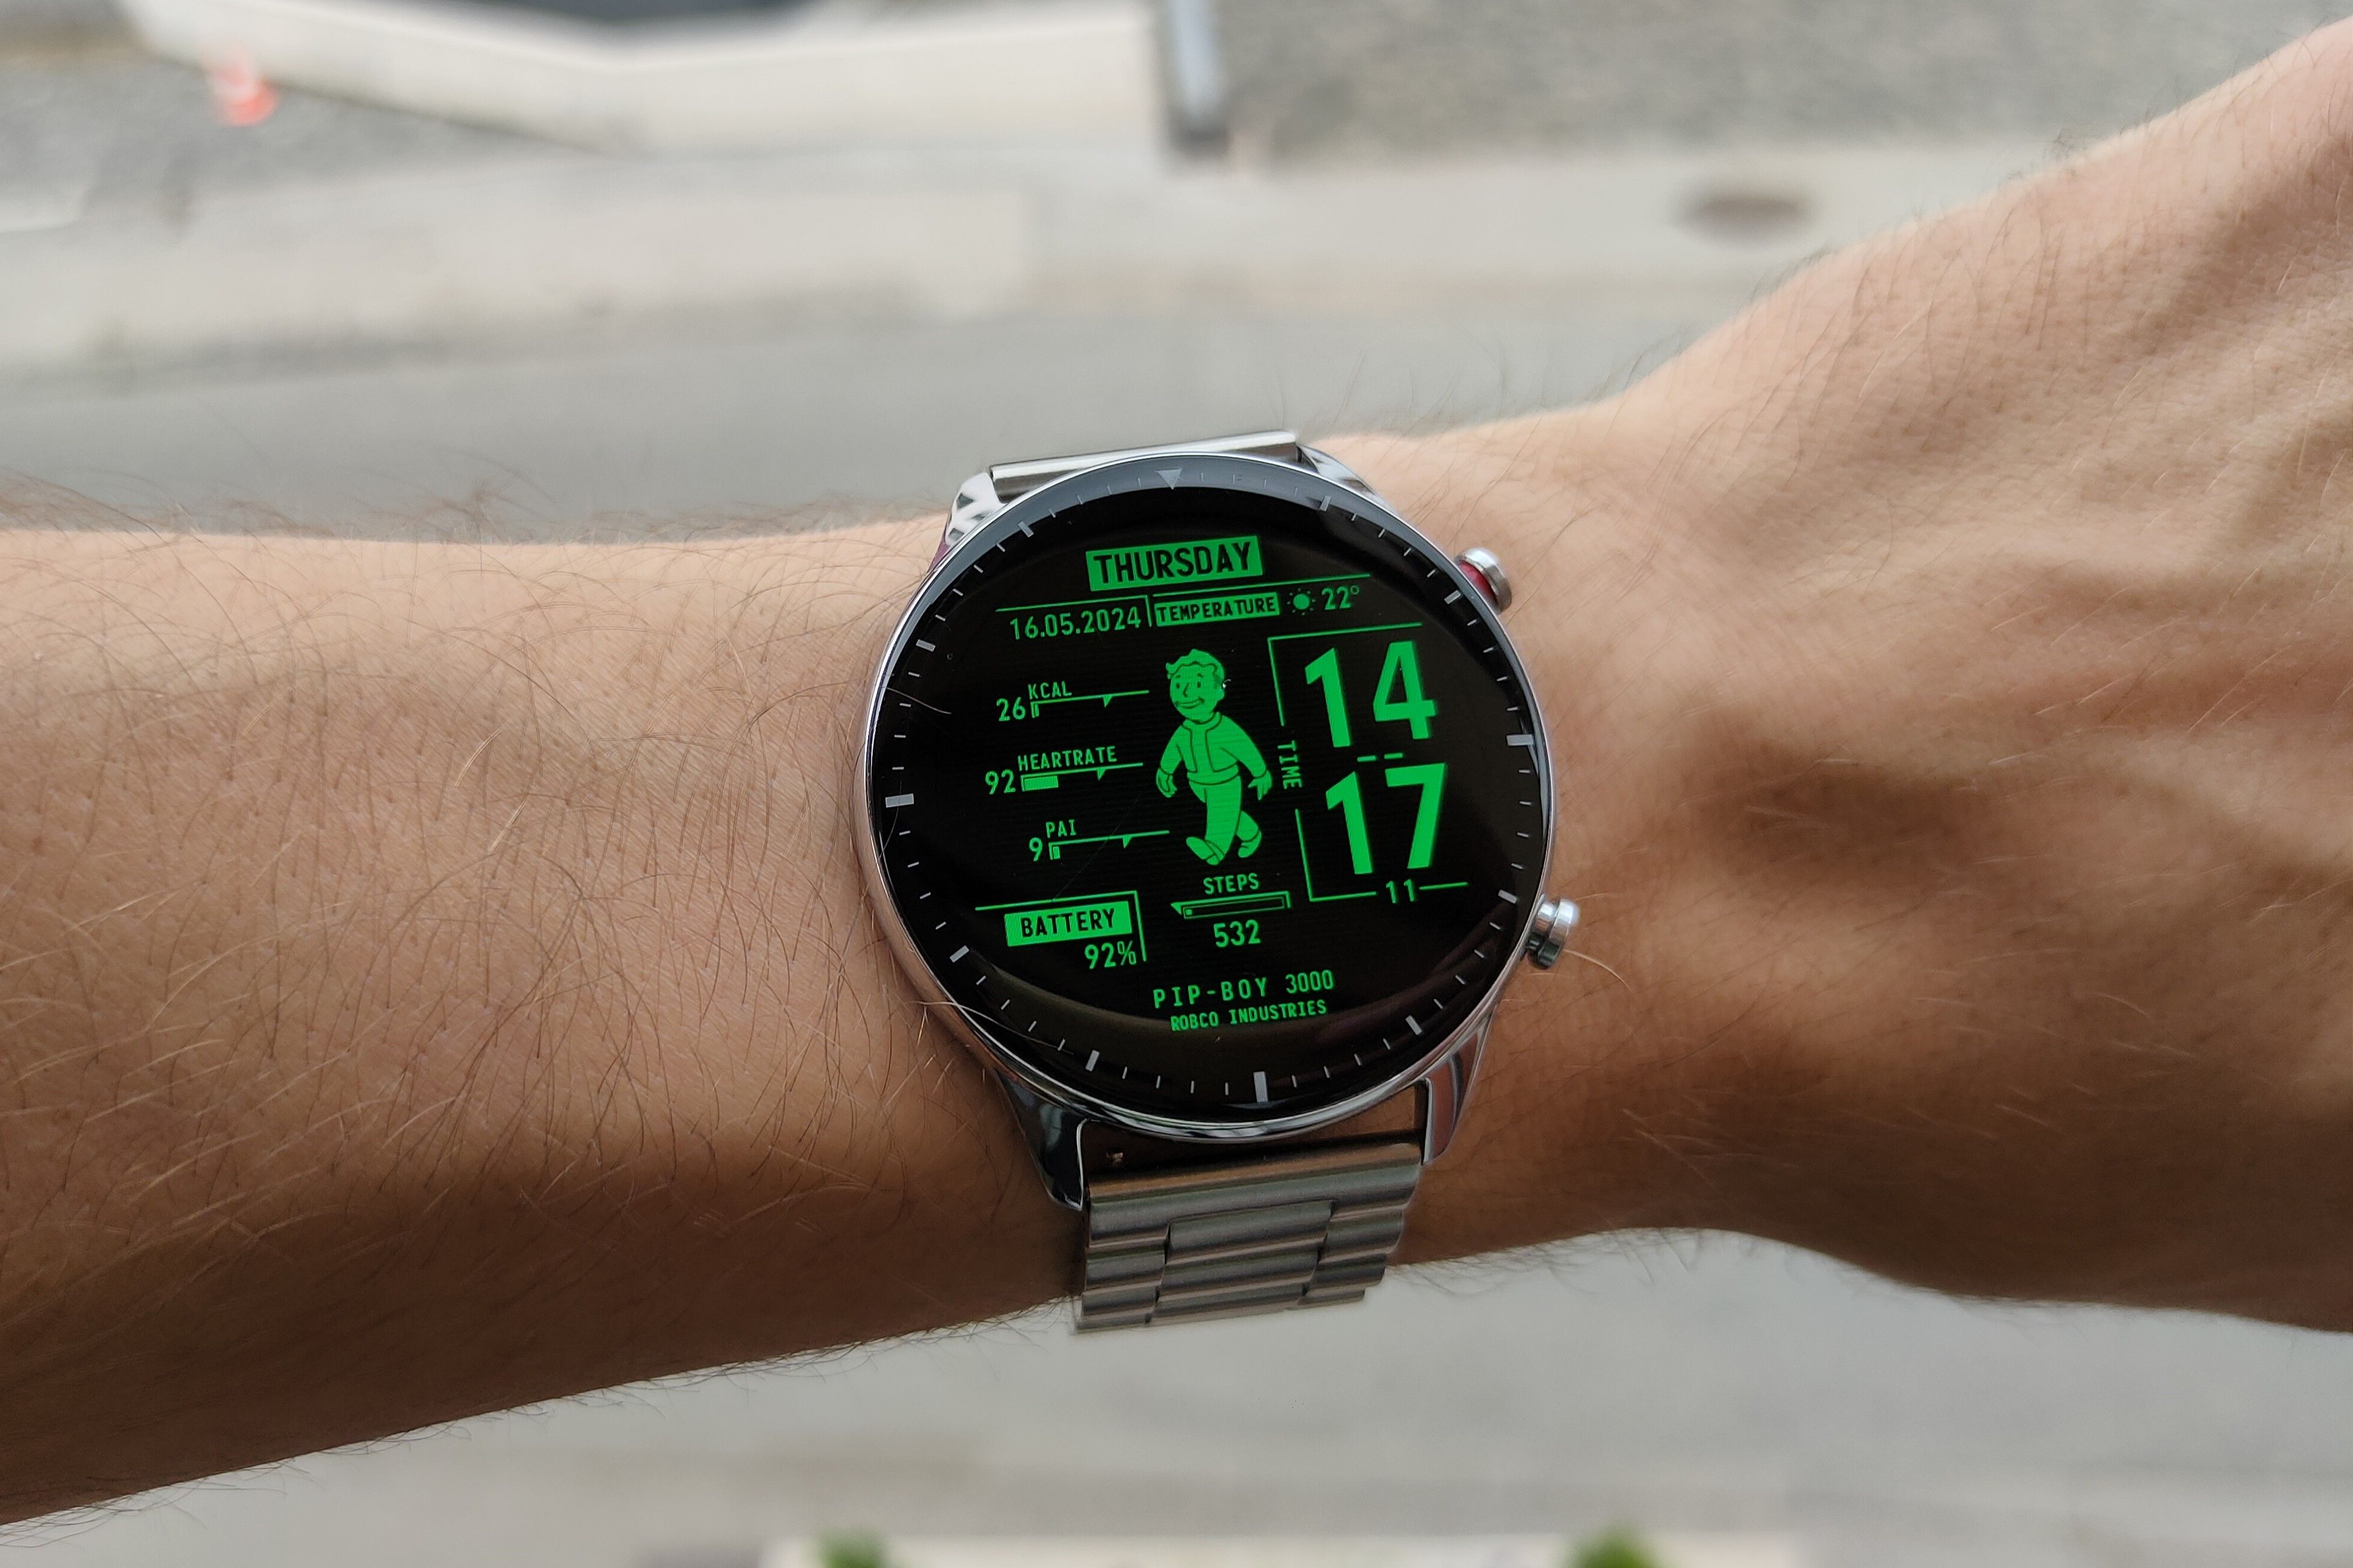 The Amazfit GTR 2 smartwatch with a stainless steel band and a Fallout Pip Boy watchface.